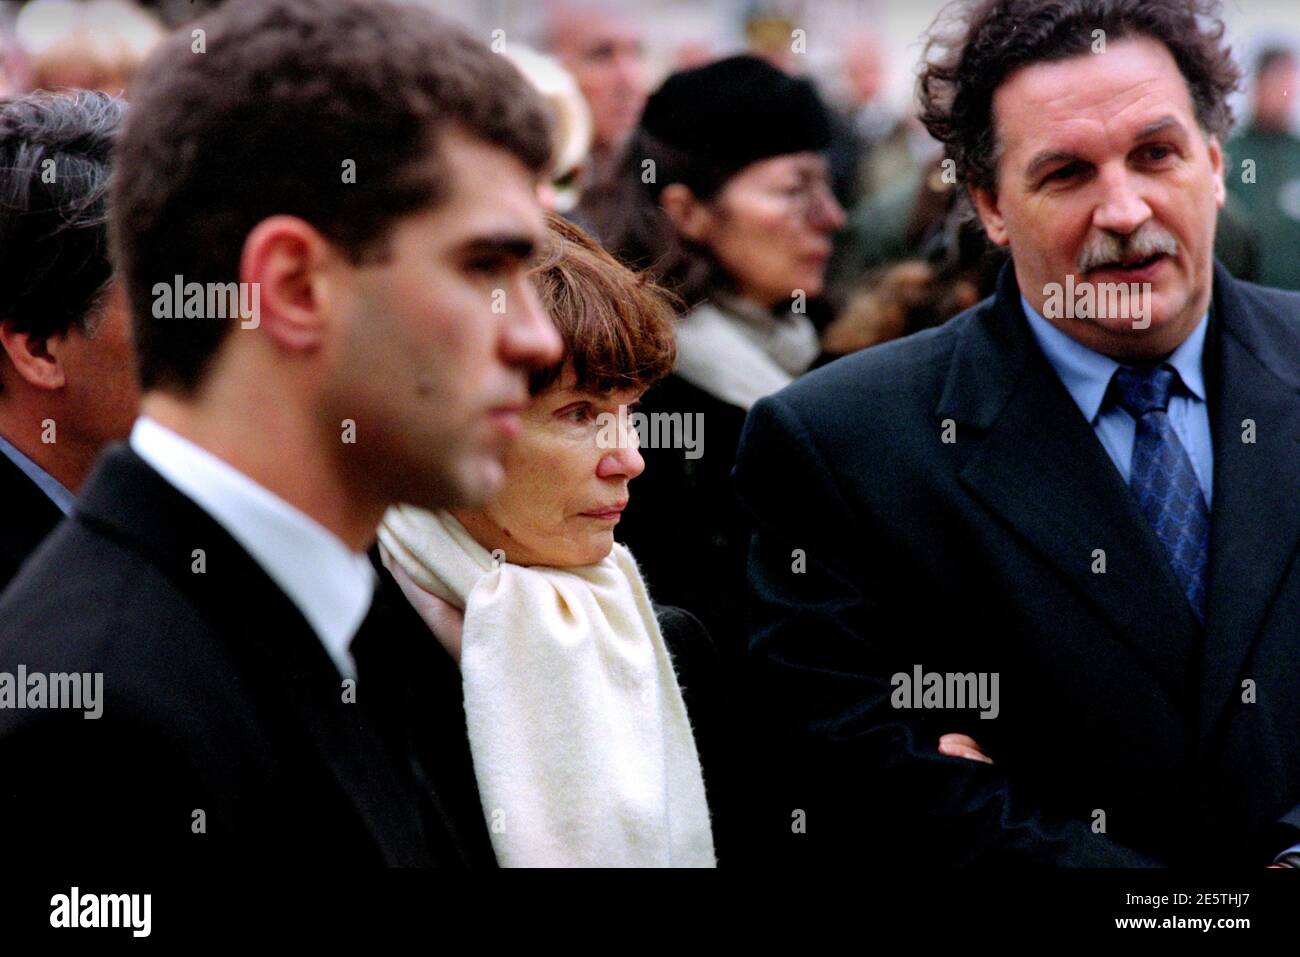 Francois Mitterrand Funeral in his home town of Jarnac in the Charente in south western France 11 January 1996 The Danielle Mitterrand the wife of Francois Mitterrand follow his coffin at the former Presidents funeral on the right is Jean-Christophe Mitterrand the son of both Danielle and Francois. Stock Photo